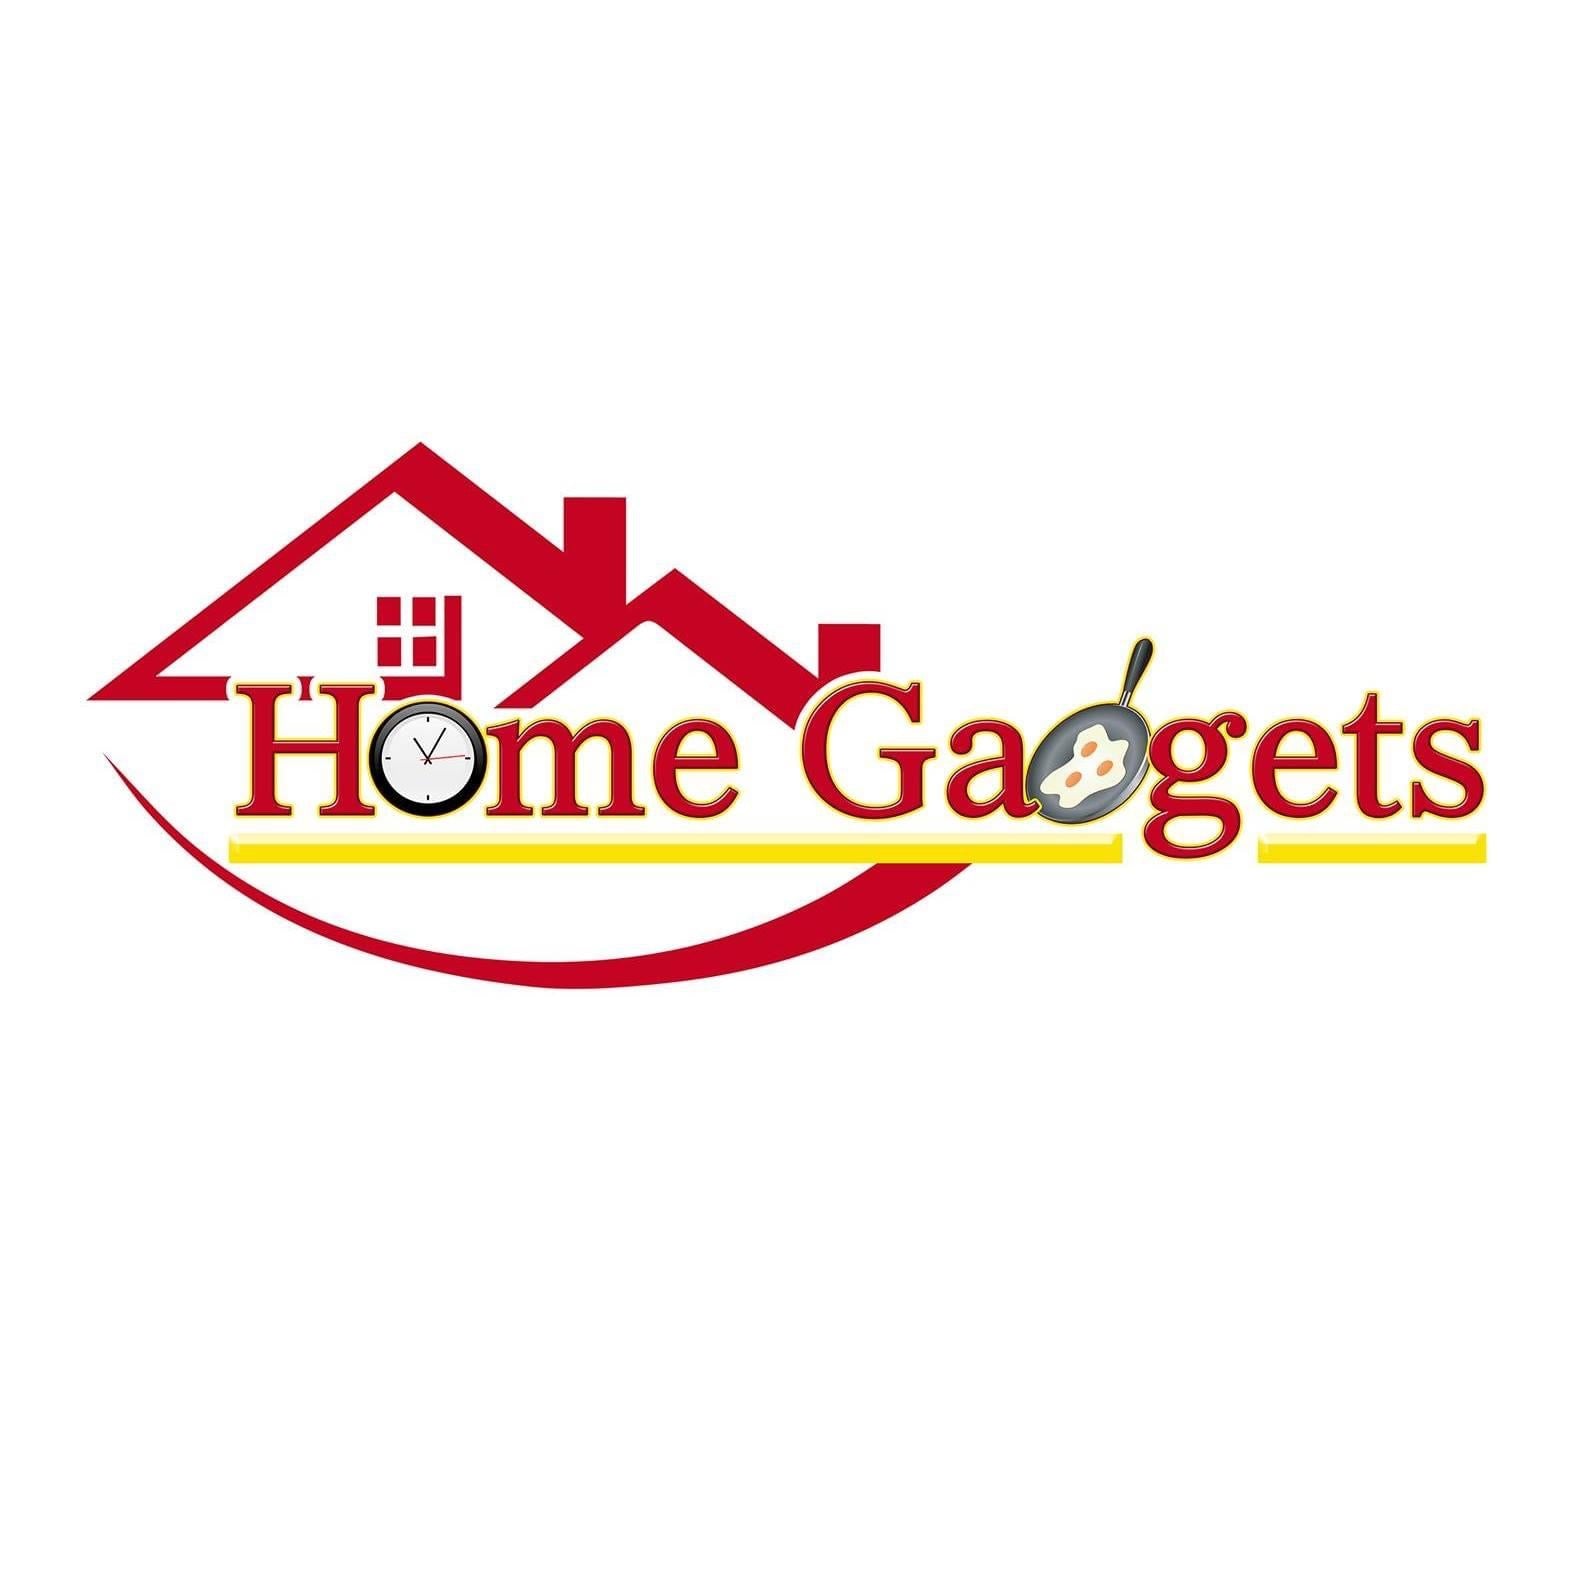 Home Gadgets - Housewares and Kitchen Supply Store